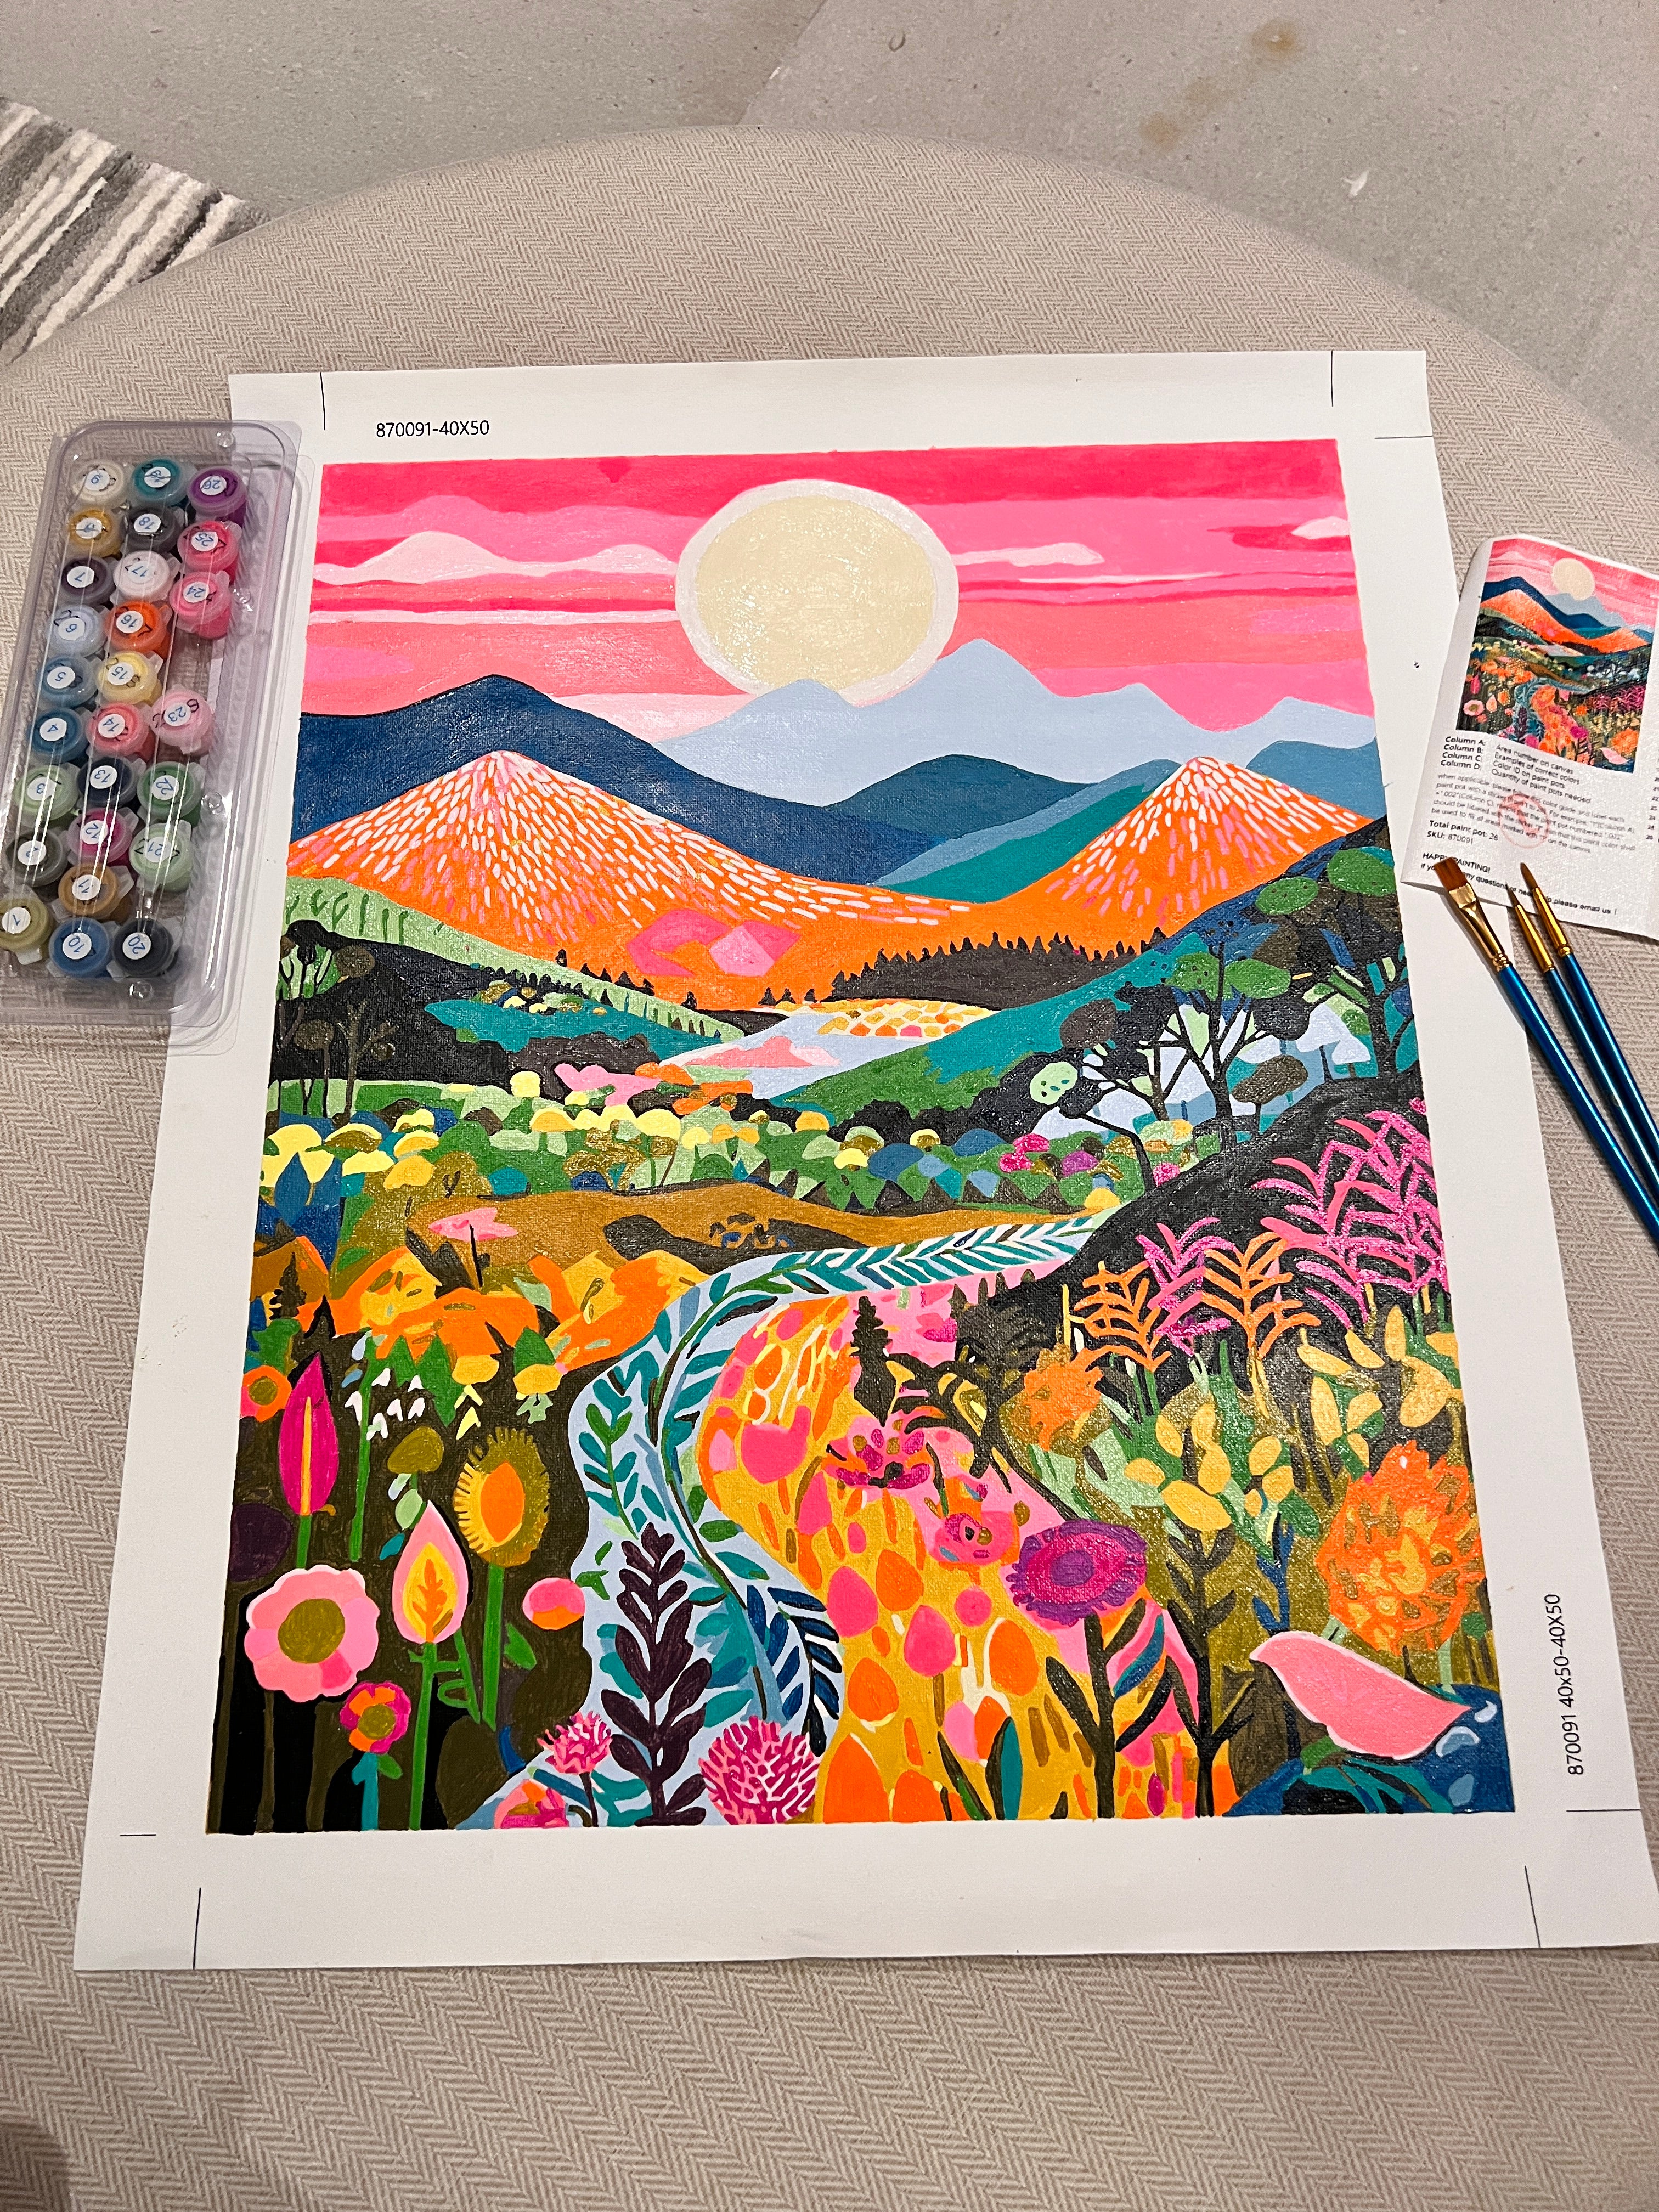 Video laden: Colorful Mountain Series by ArtVibe - Original Paint by Numbers